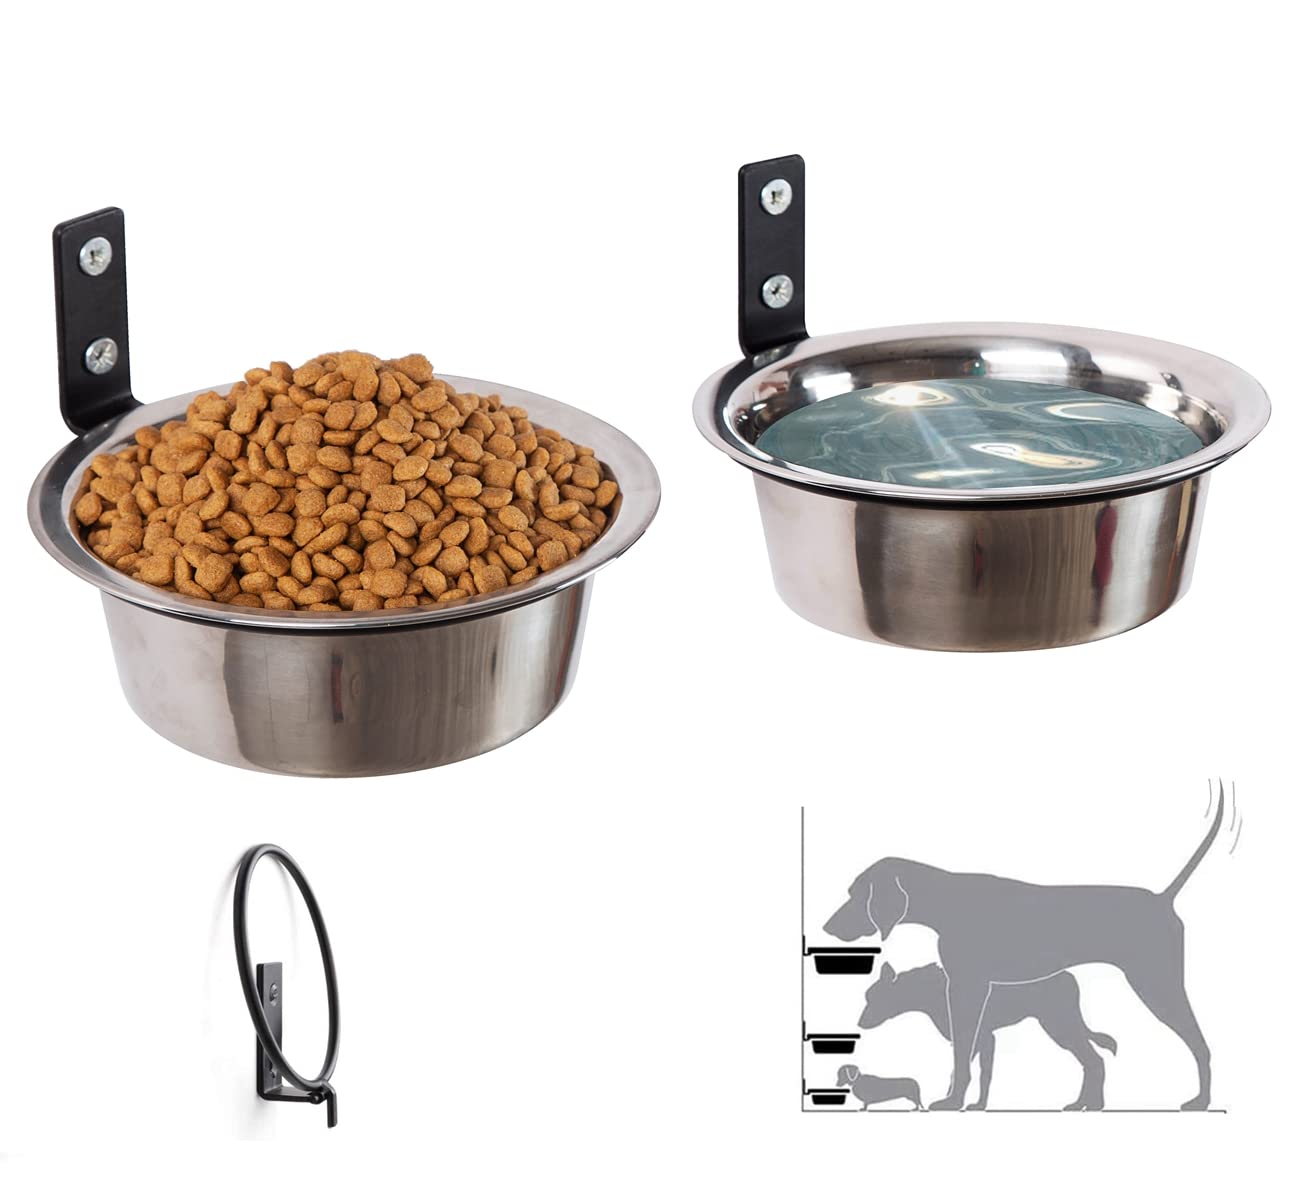 Elevated Dog Bowls for Small Dogs, Elevated Cat Bowls for Indoor Cats, Adjustable Raised Dog Bowl Stand, Raised Cat Food Bowls with 2 Stainless Steel